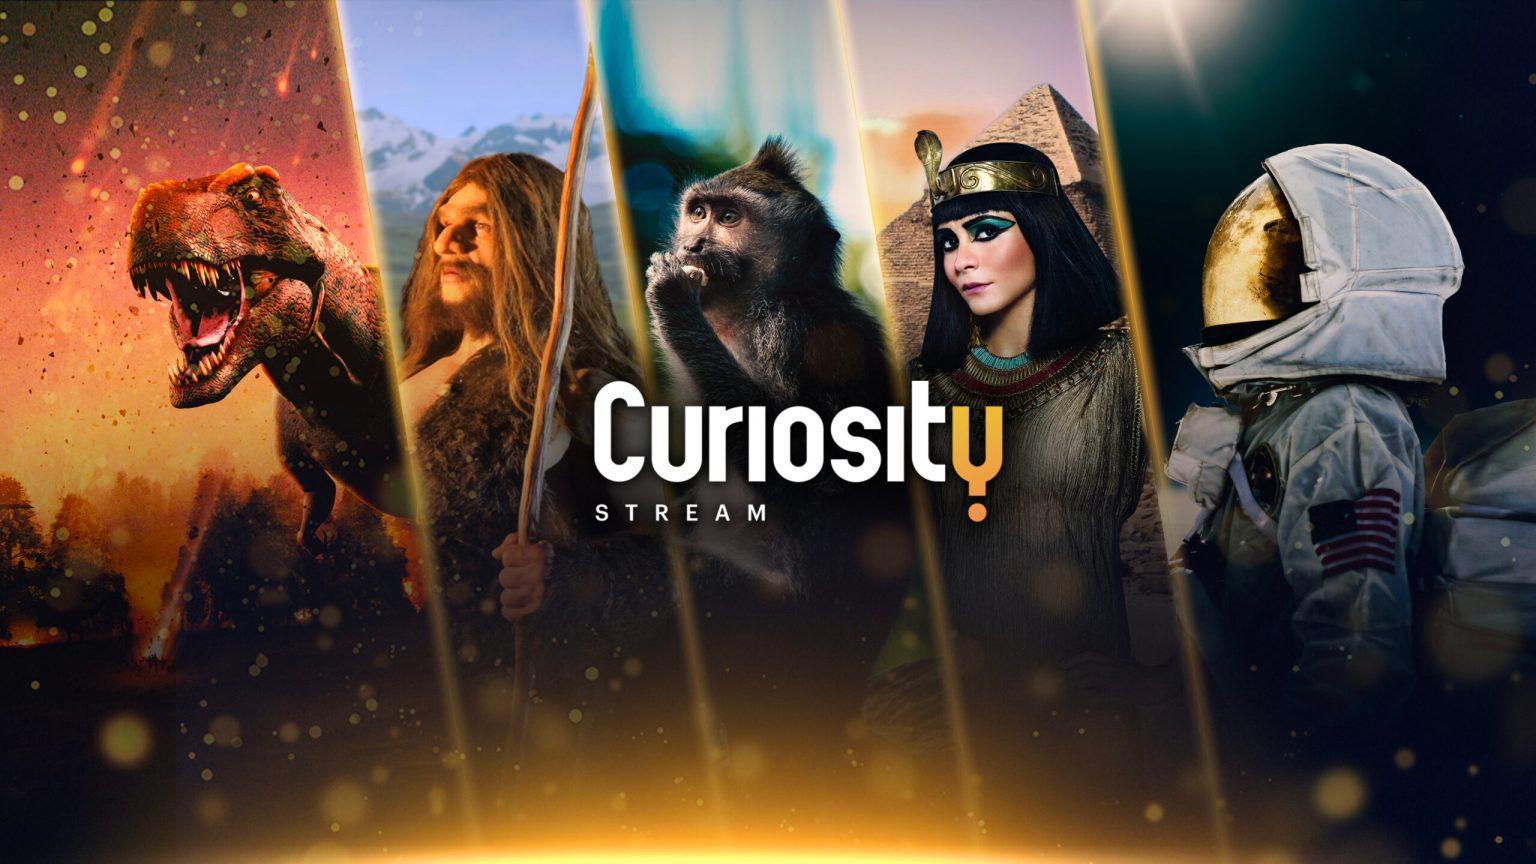 Save 30% on Curiosity Stream During Its Black Friday Sale